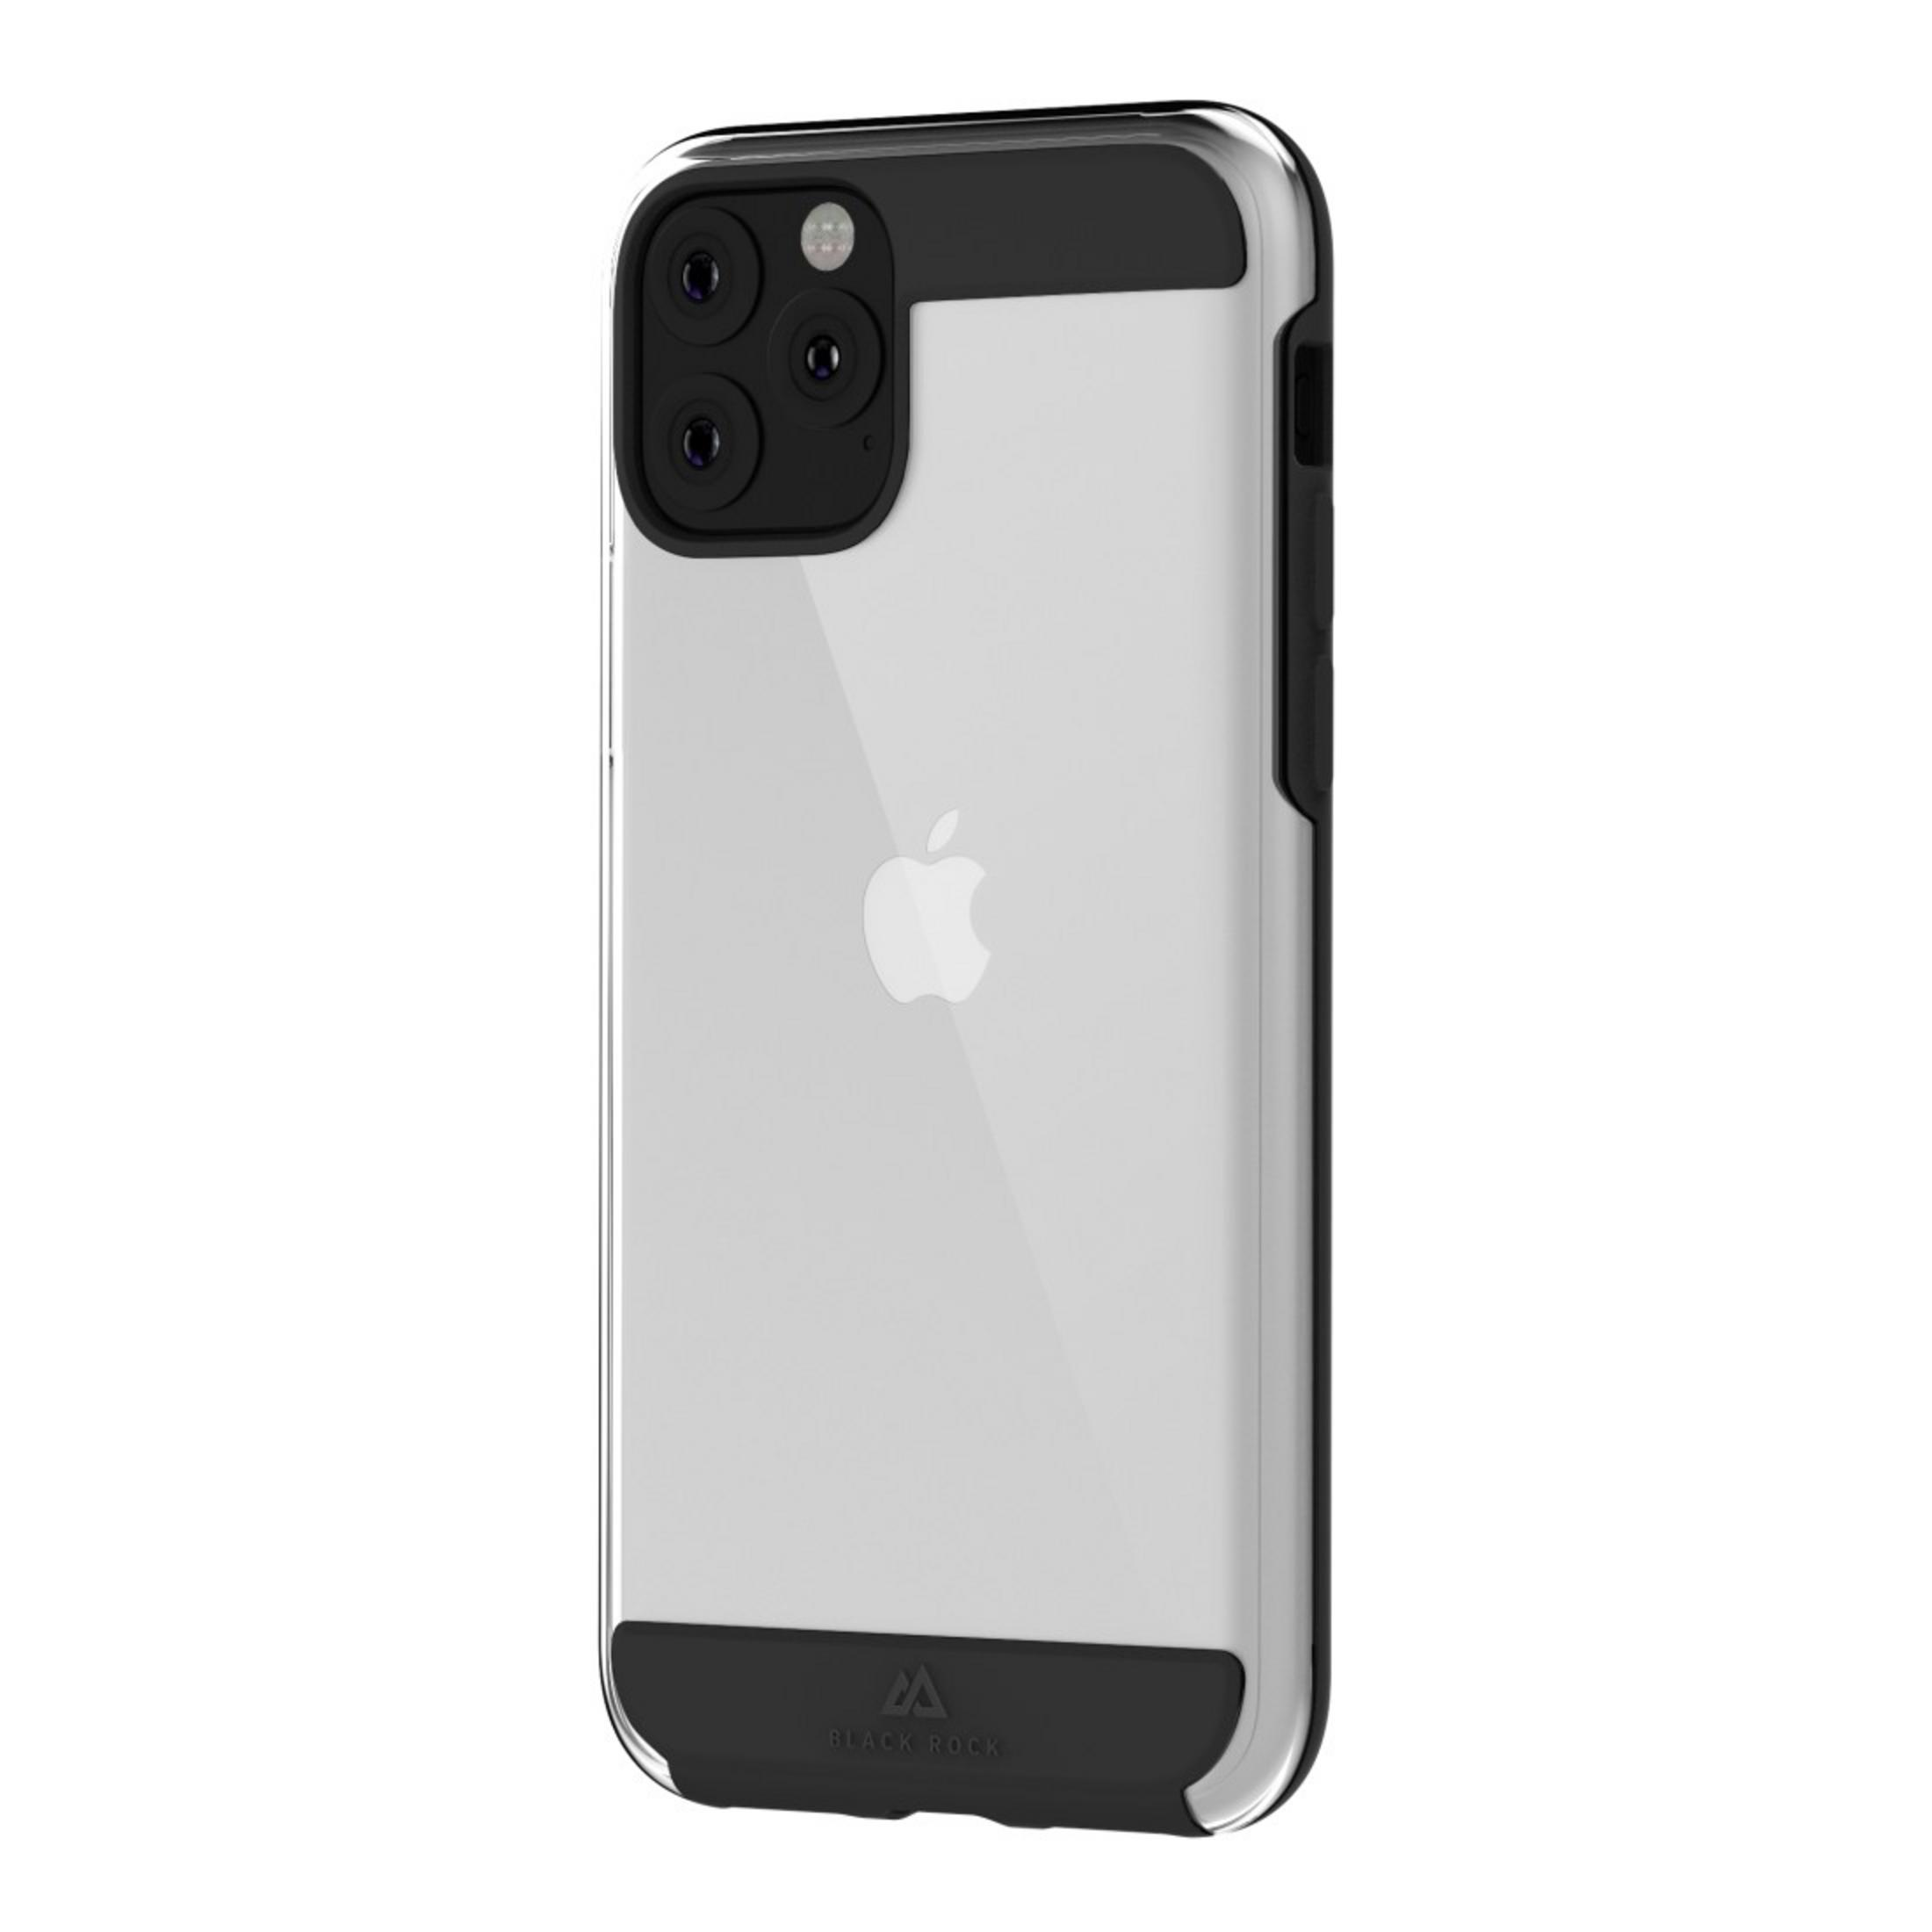 BLACK ROCK 186970 AIR Pro, iPhone 11 CO Apple, IPH SW, Backcover, ROBUST 11 PRO Schwarz